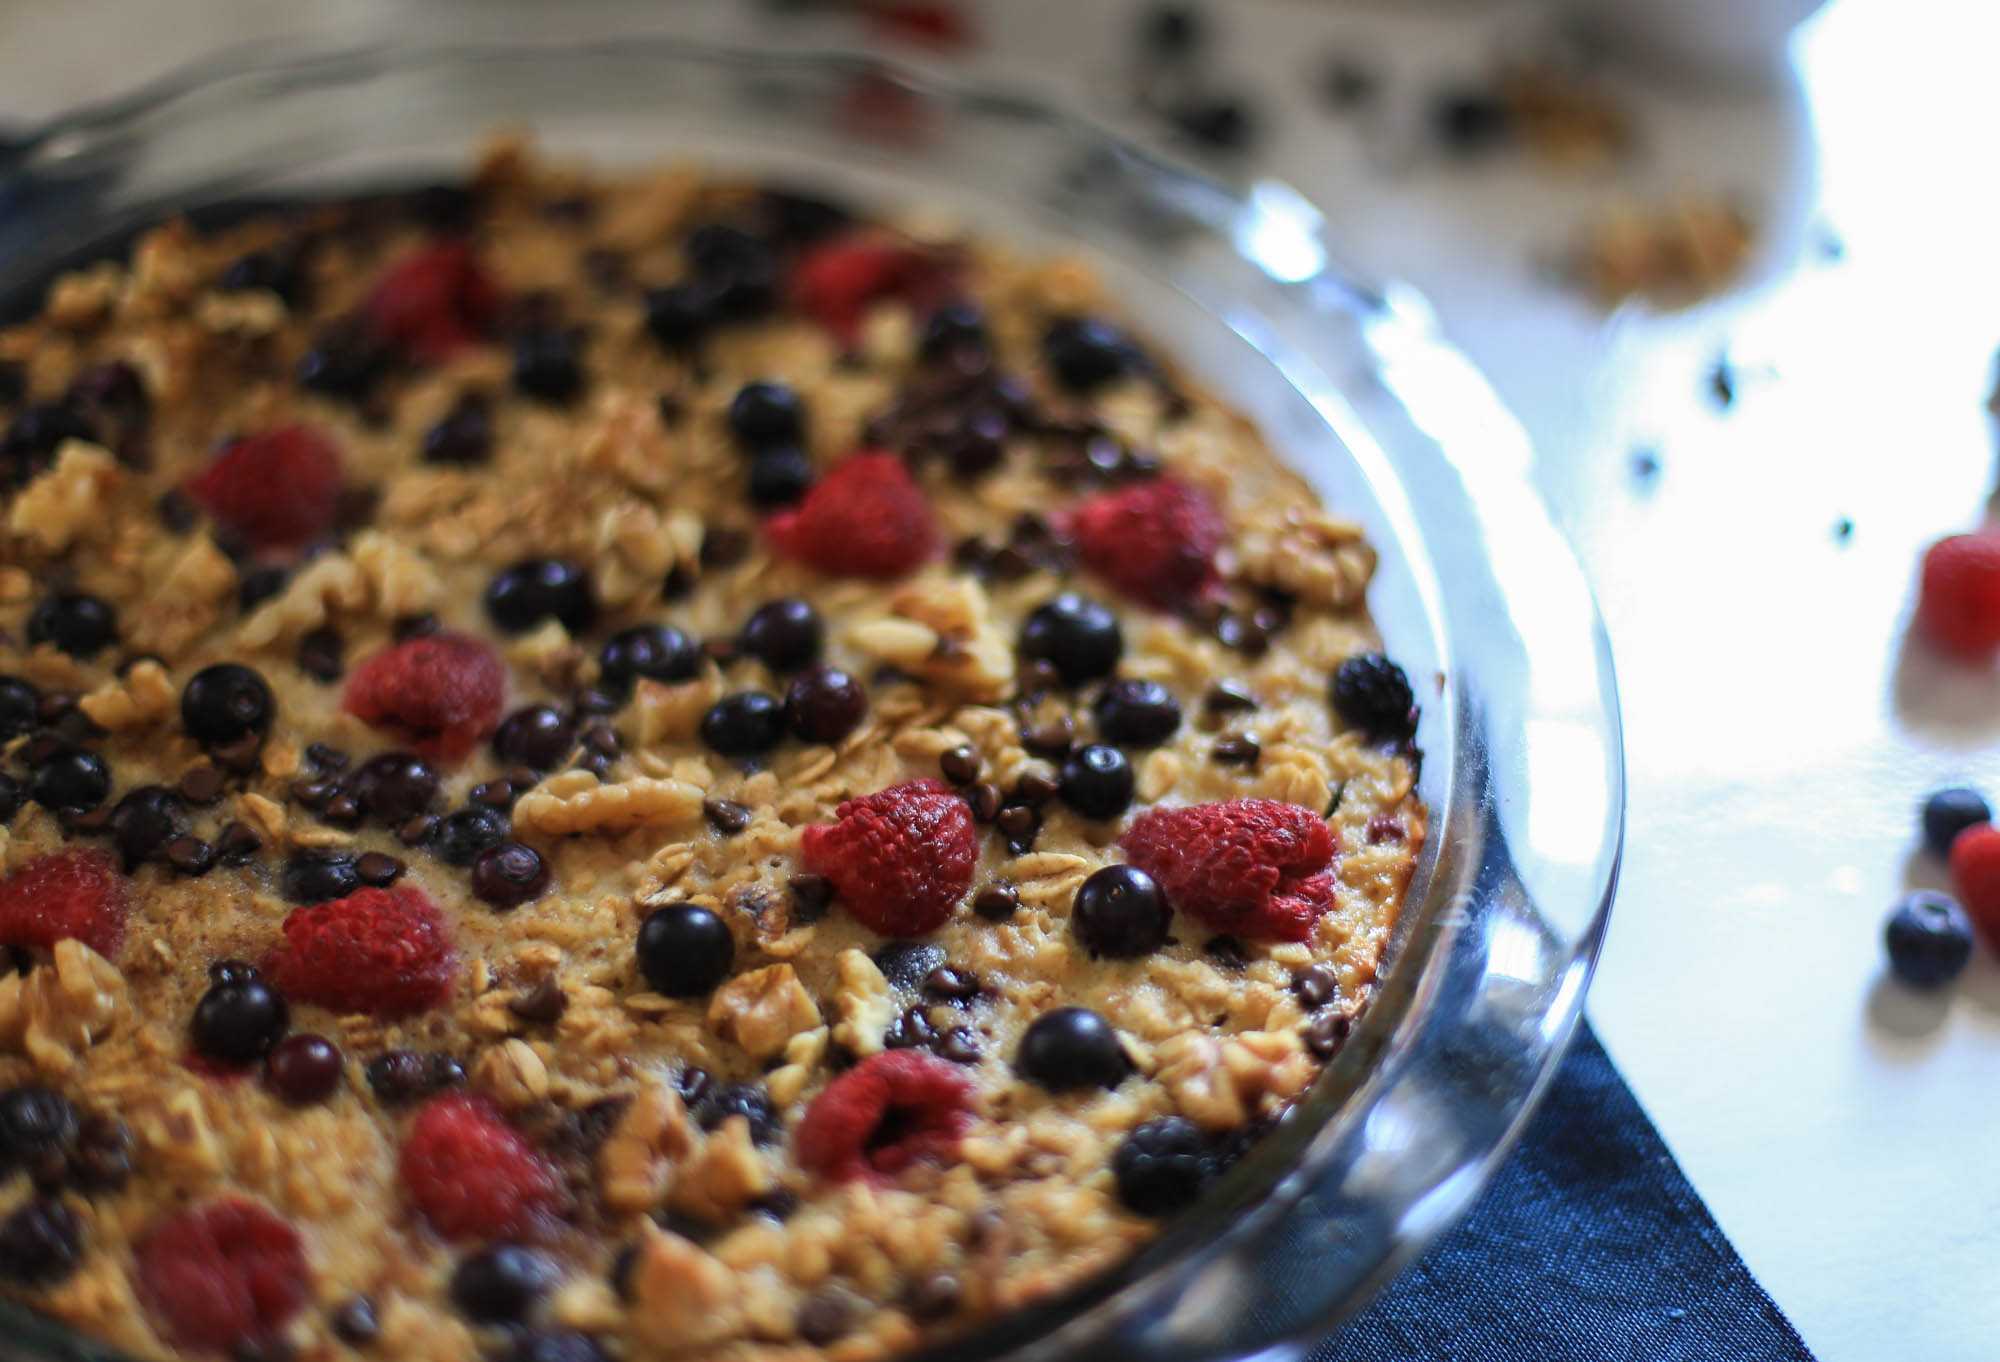 Easy Baked Oatmeal with Berries by The District Table